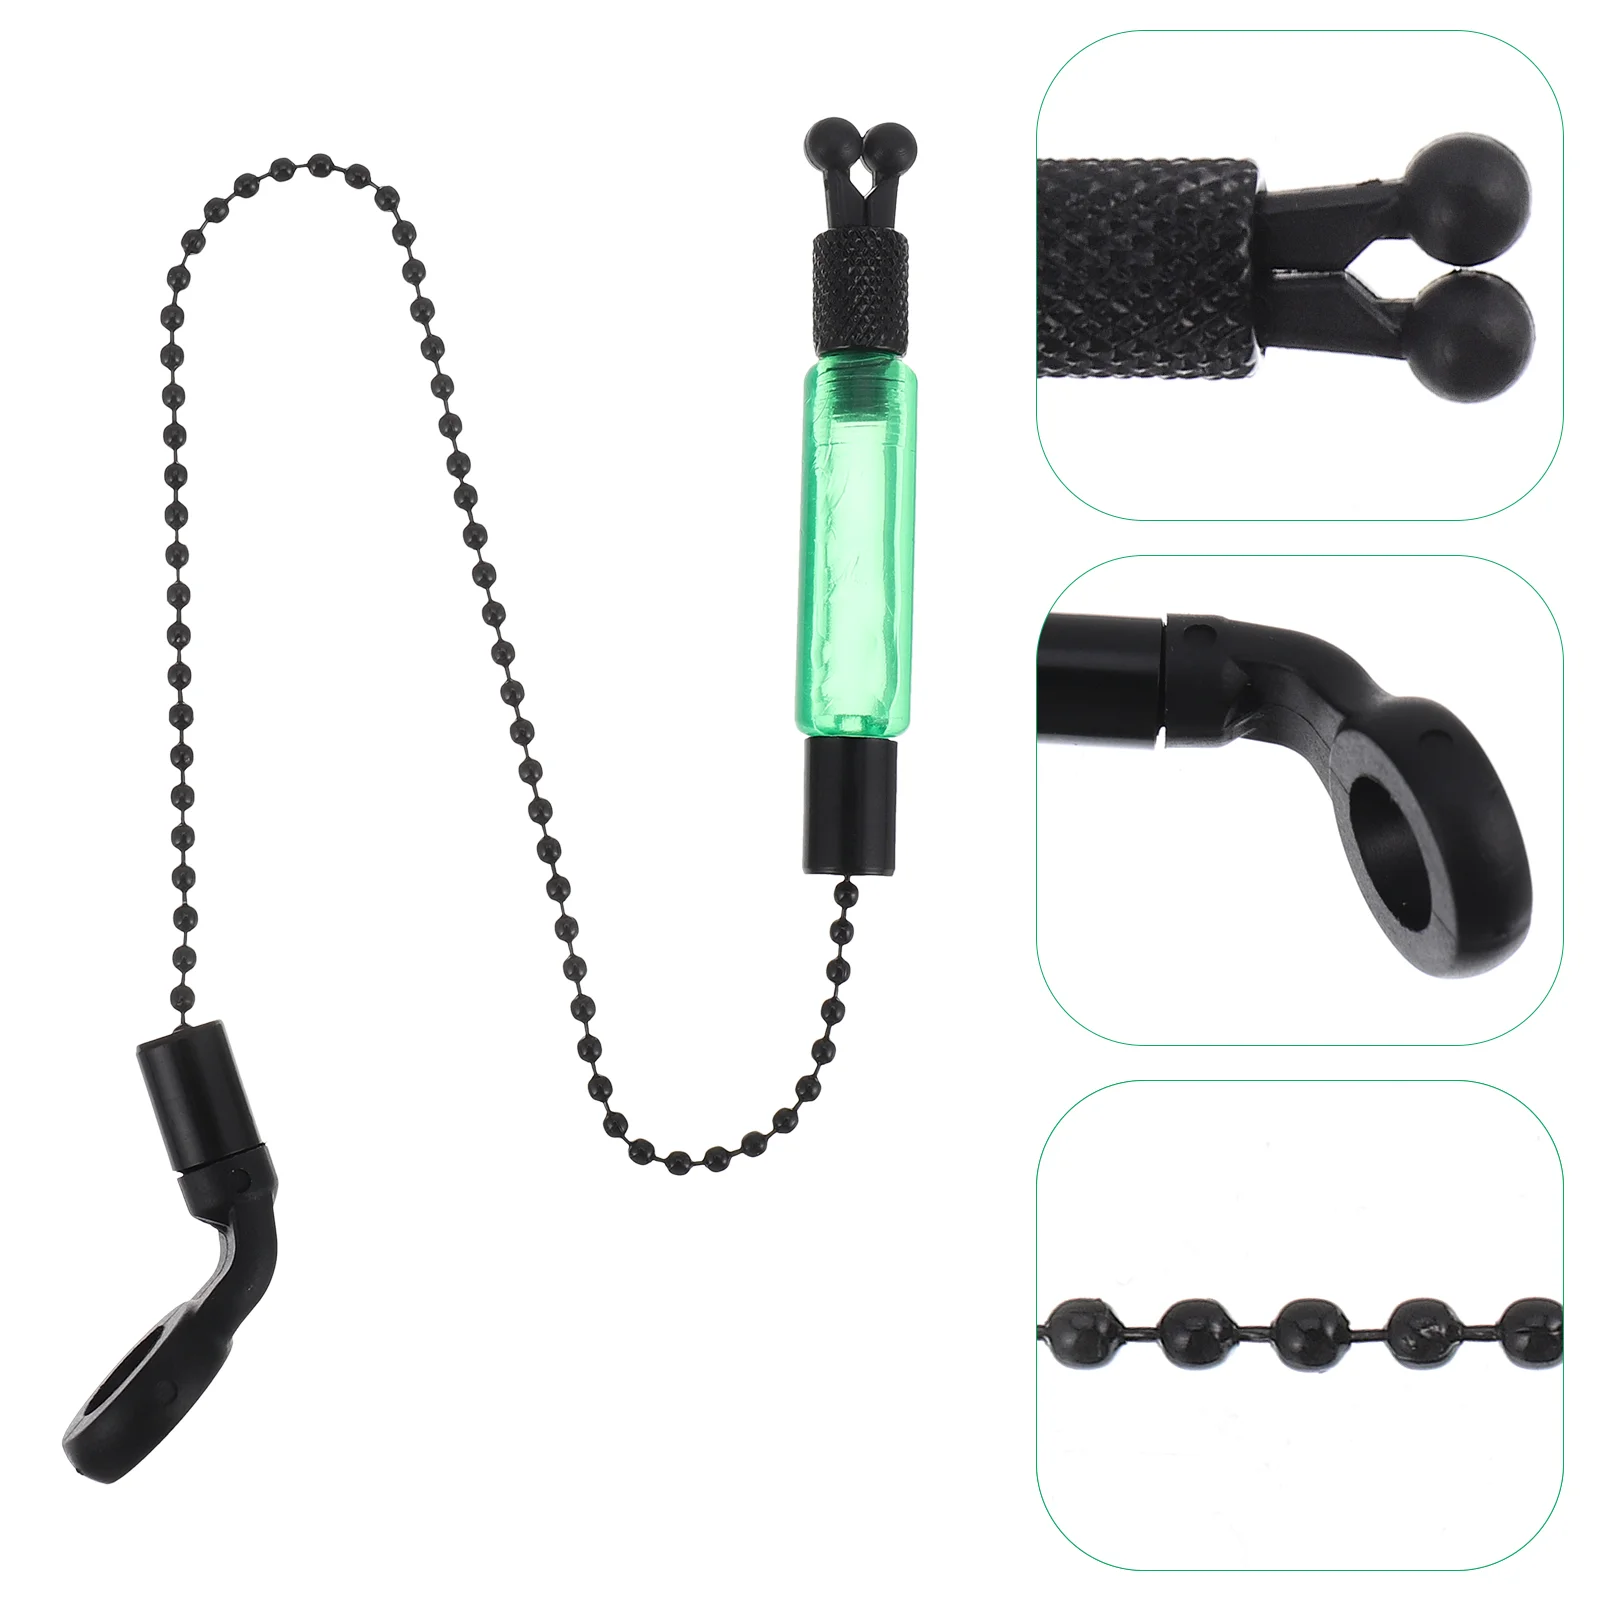 

3 Pcs Fishing Alarm Glow Accessories Rod Swingers Assisting Supplies Line Gear Alert Indicator Iron Coated Signal With